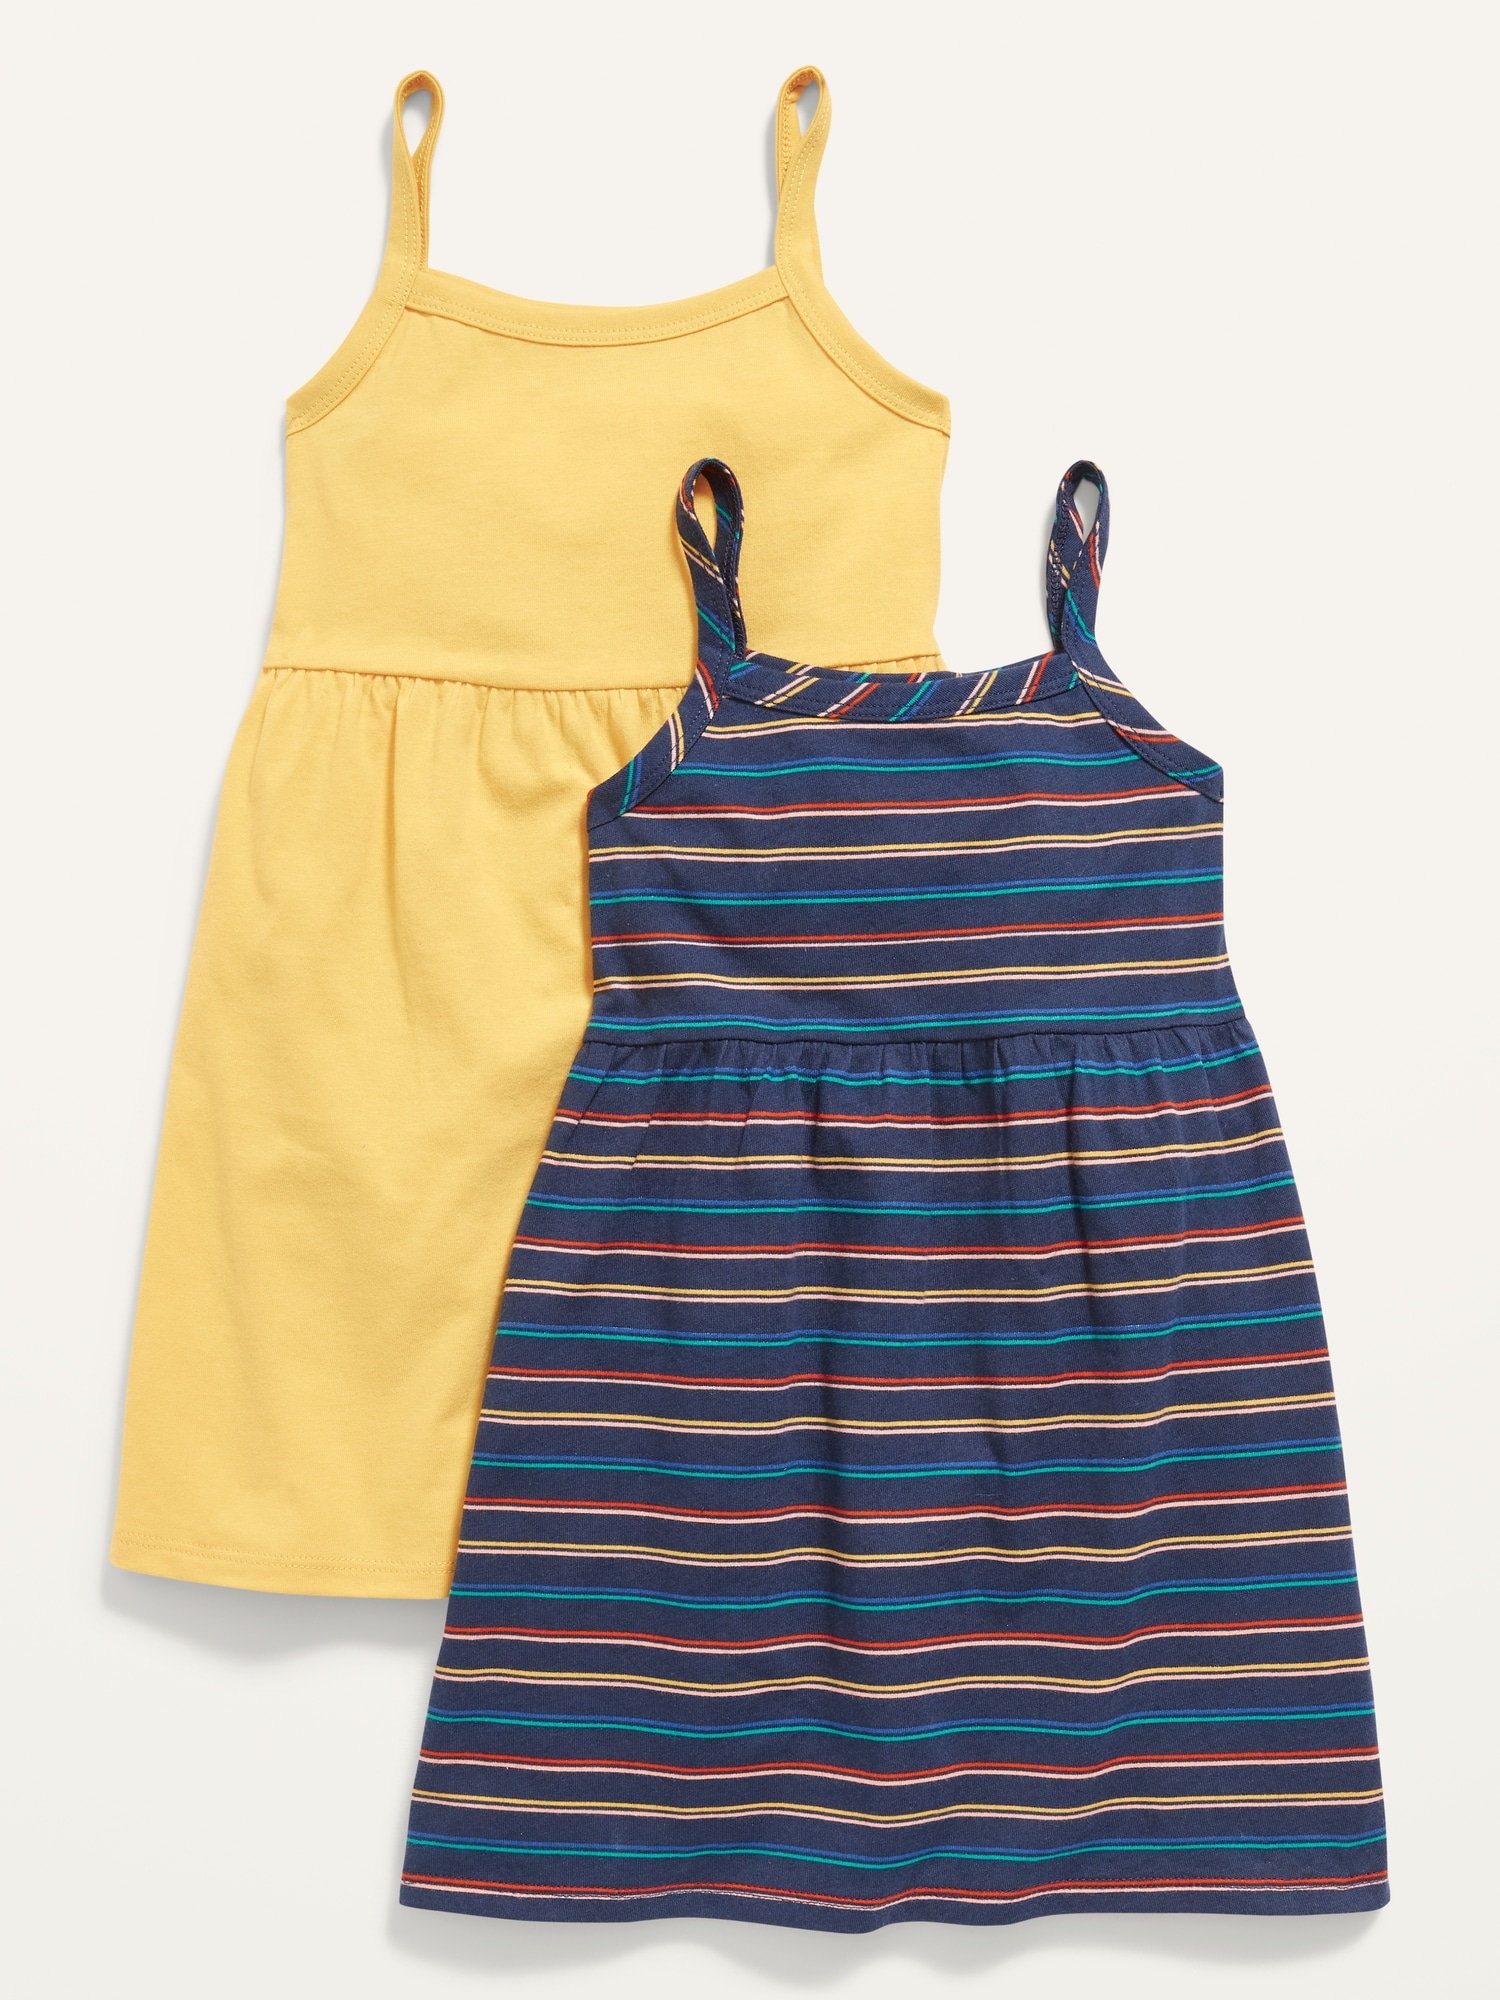 2-Pack Sleeveless Fit & Flare Jersey Dress for Toddler Girls